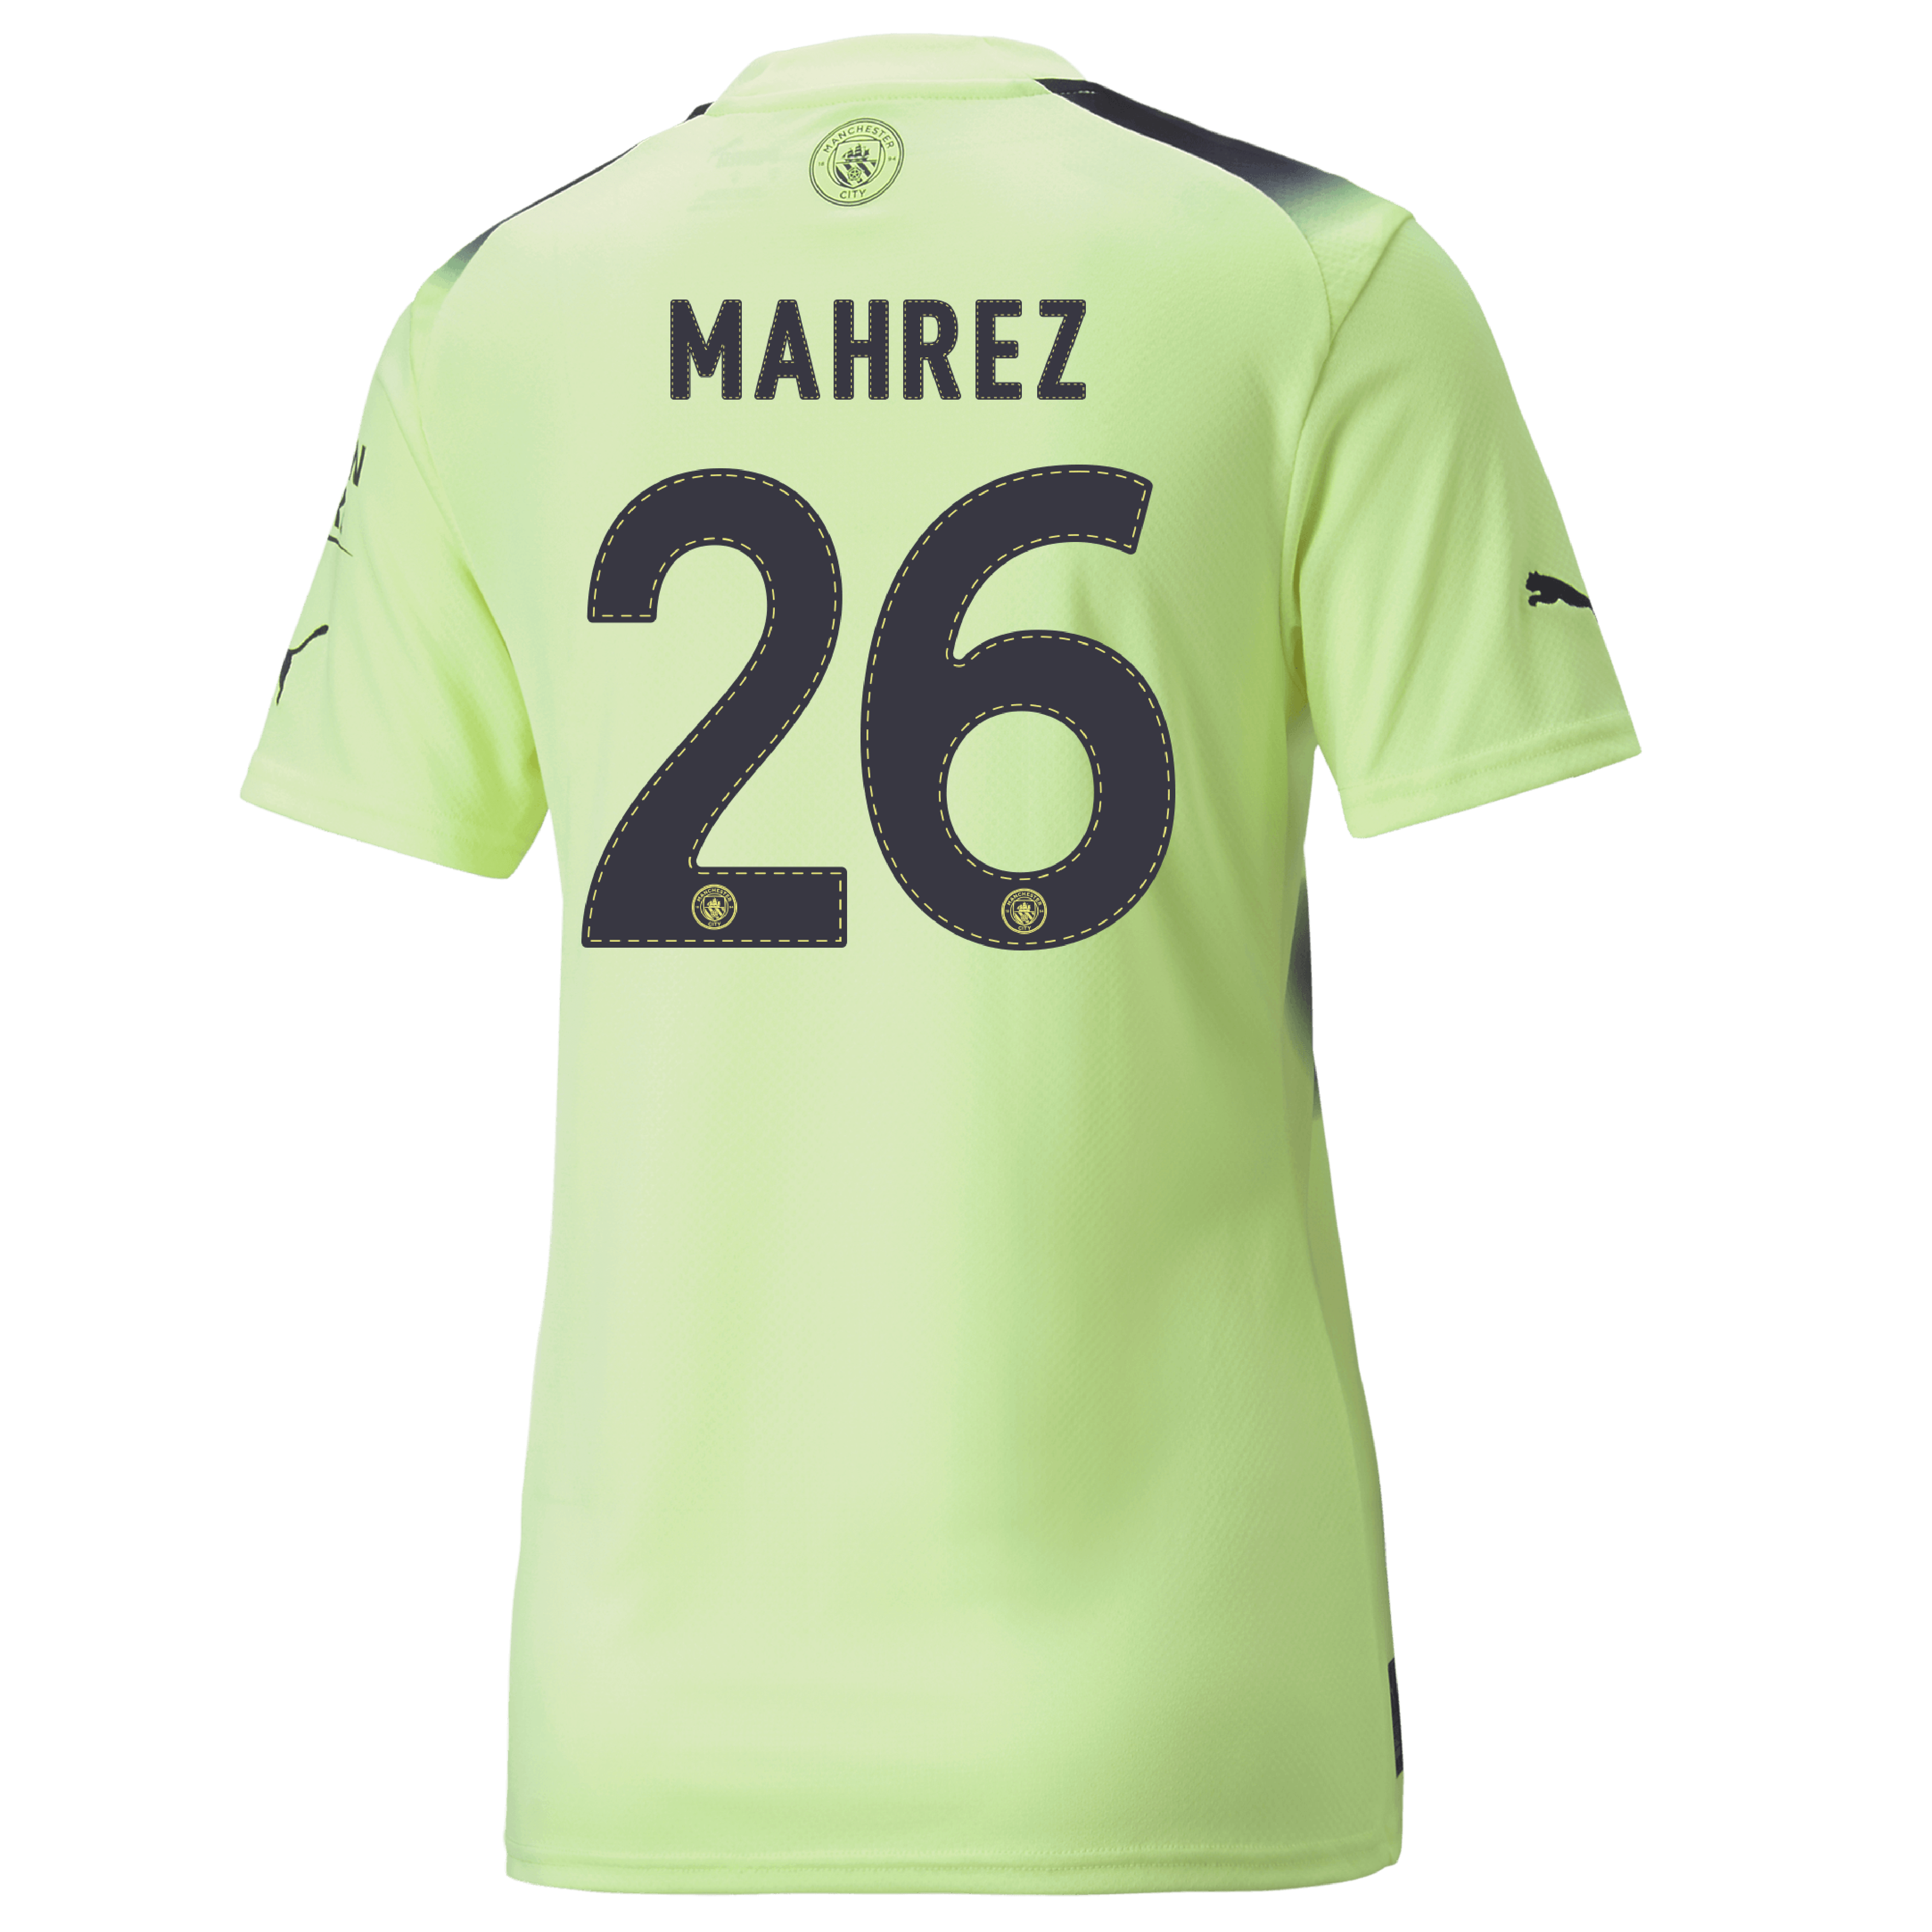 Mahrez 26 Official Sporting ID Player Size Name & Number 2017 18 19 20 Man City 